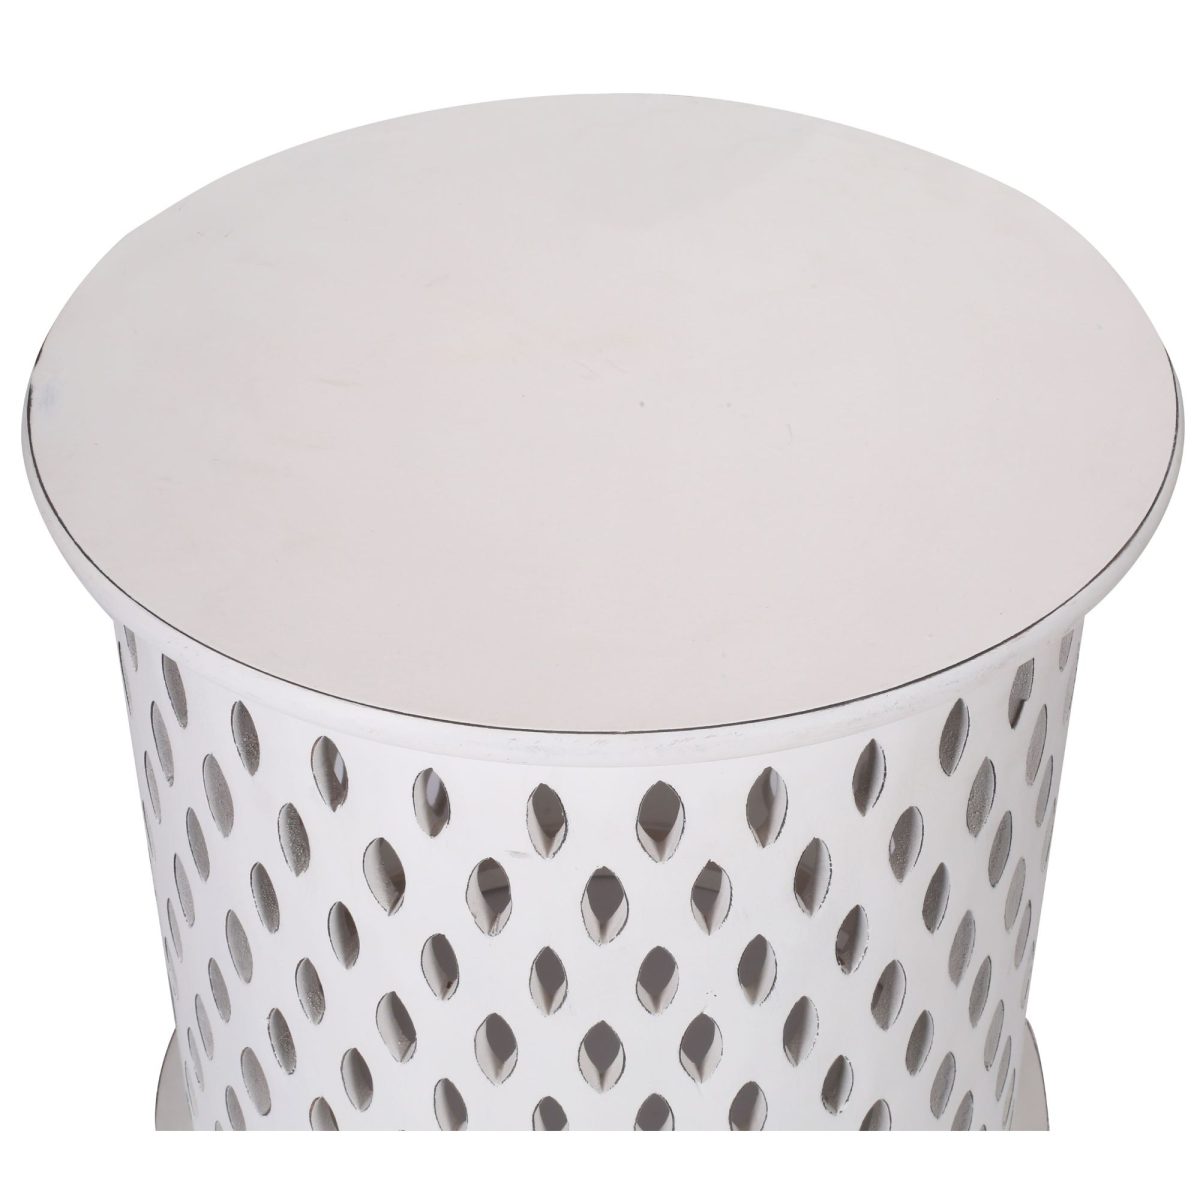 Pansy  Wooden Round Side Table Sofa End Tables – White, 50x50x50 cm